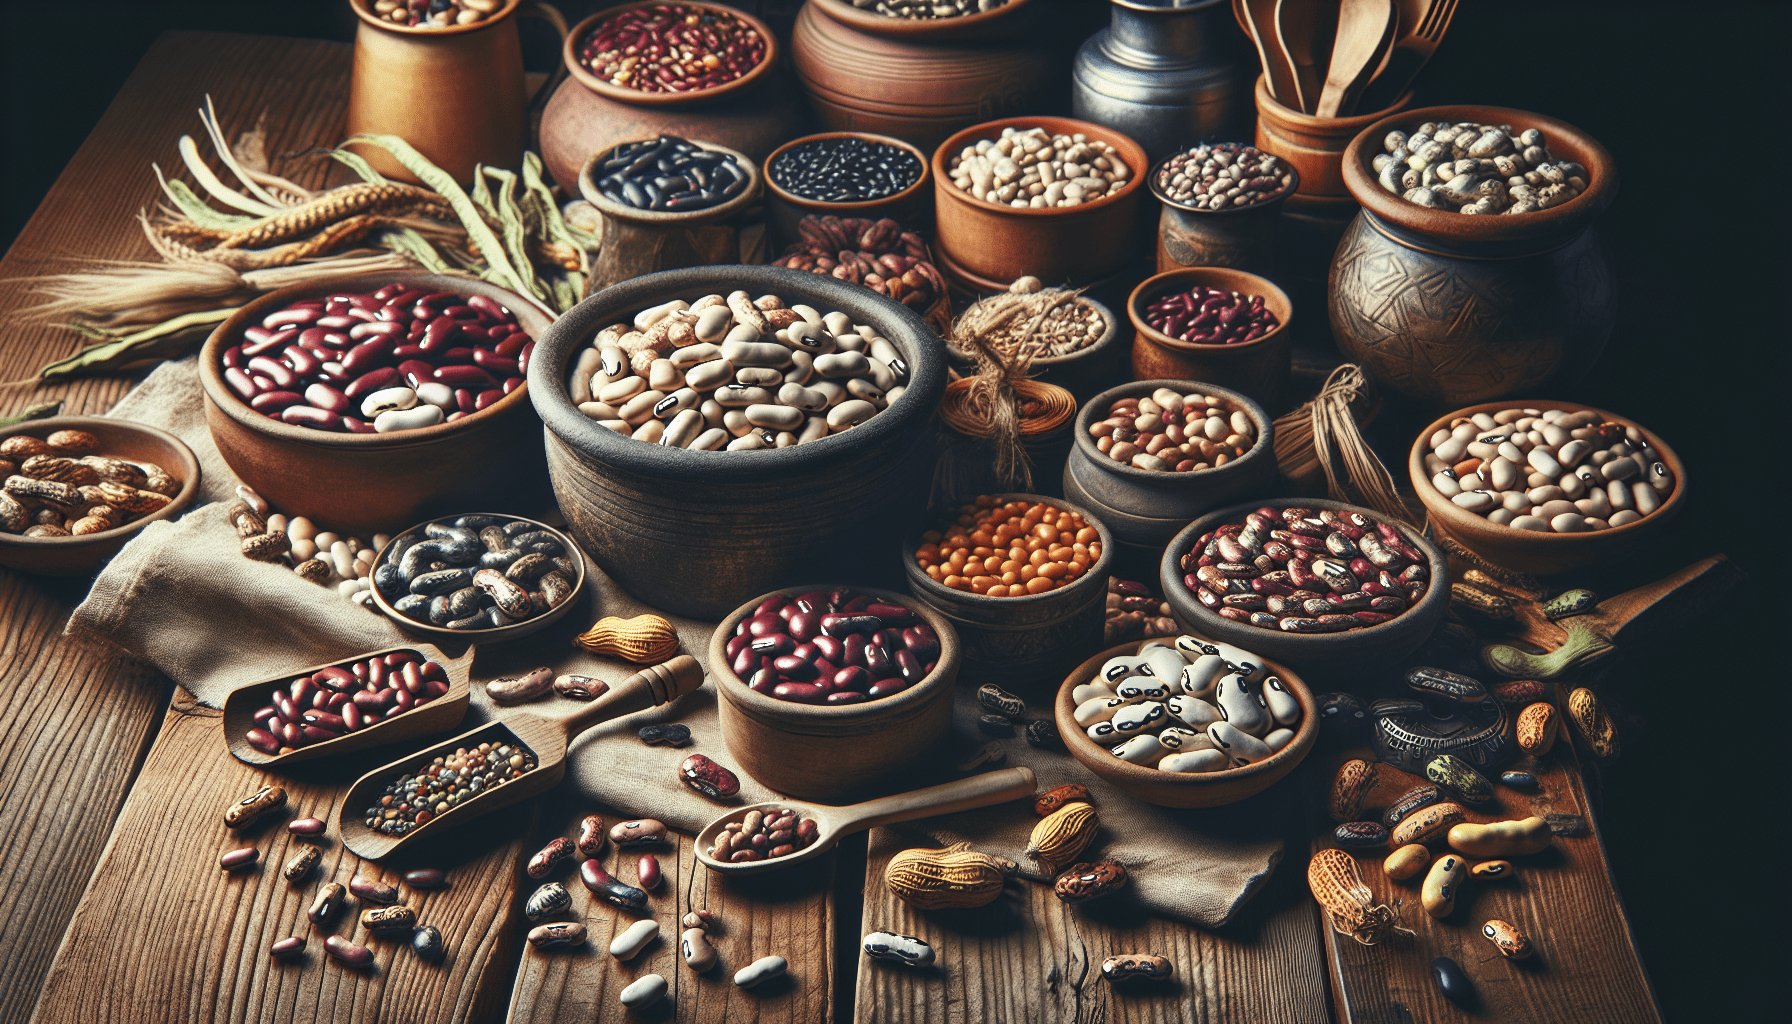 23 how do beans contribute to the overall diversity of the diet